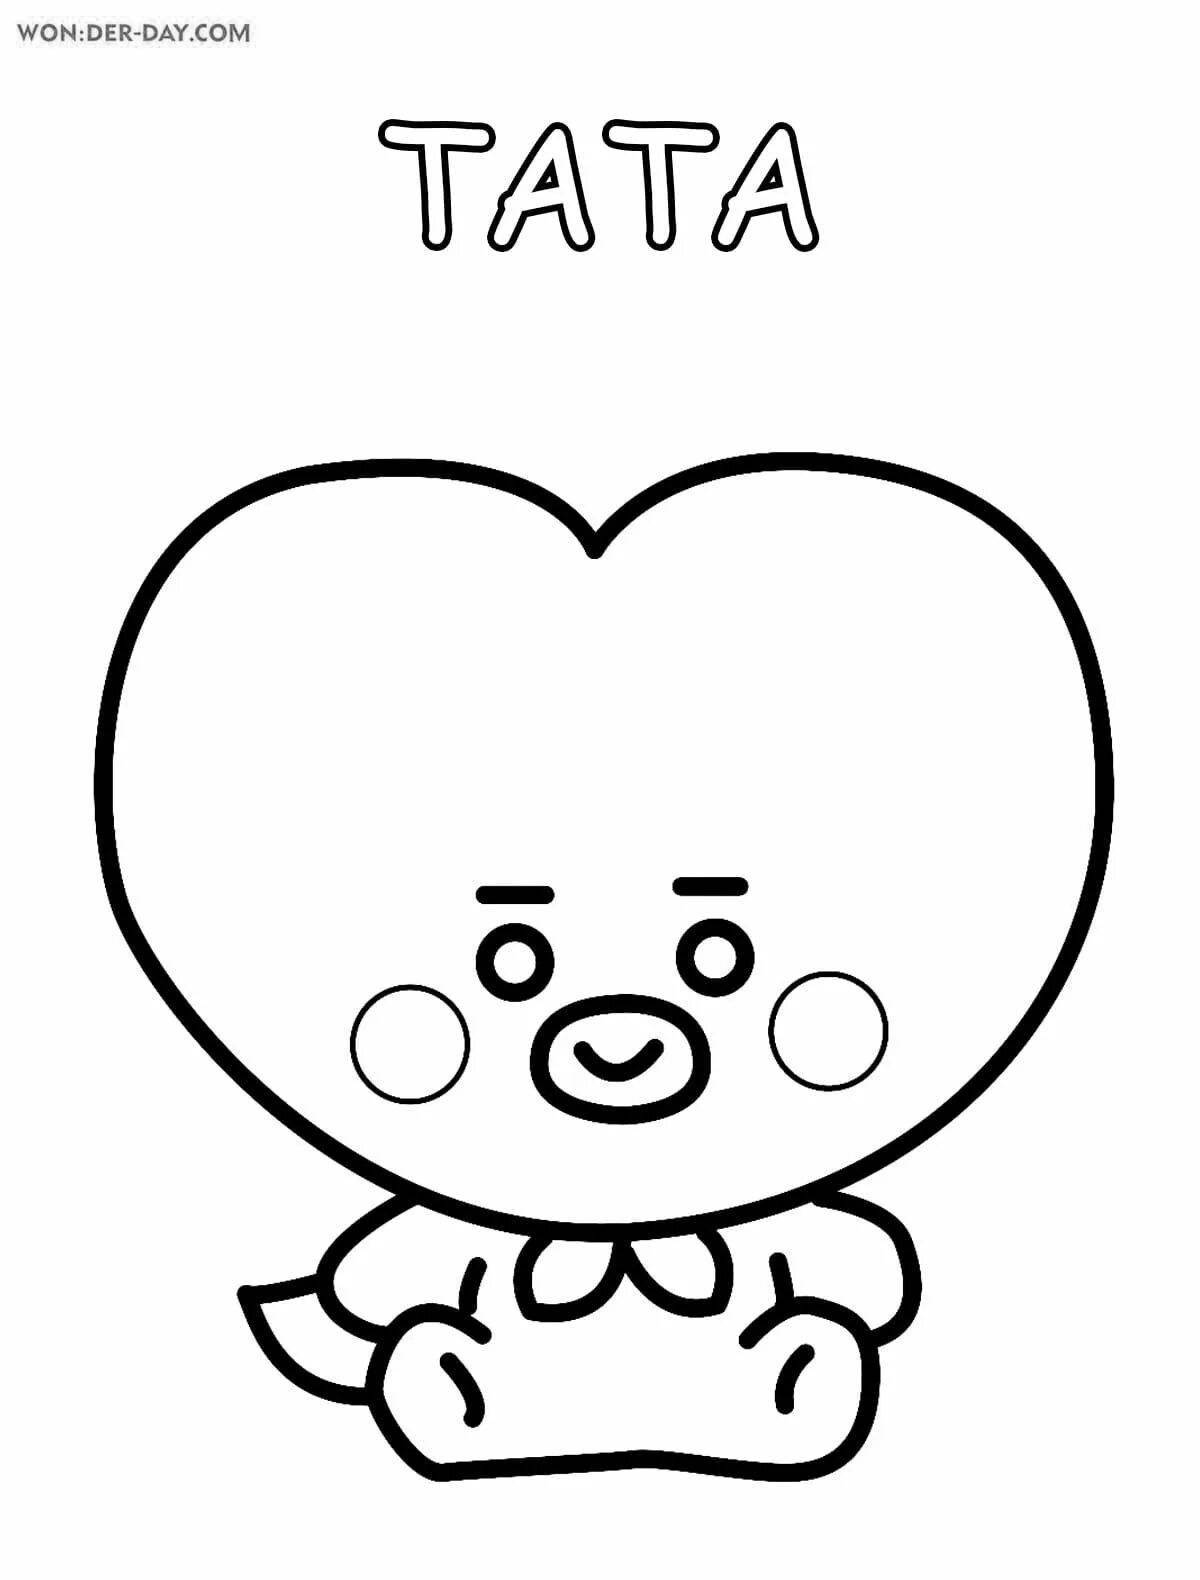 Cookie bt21 colorful coloring page